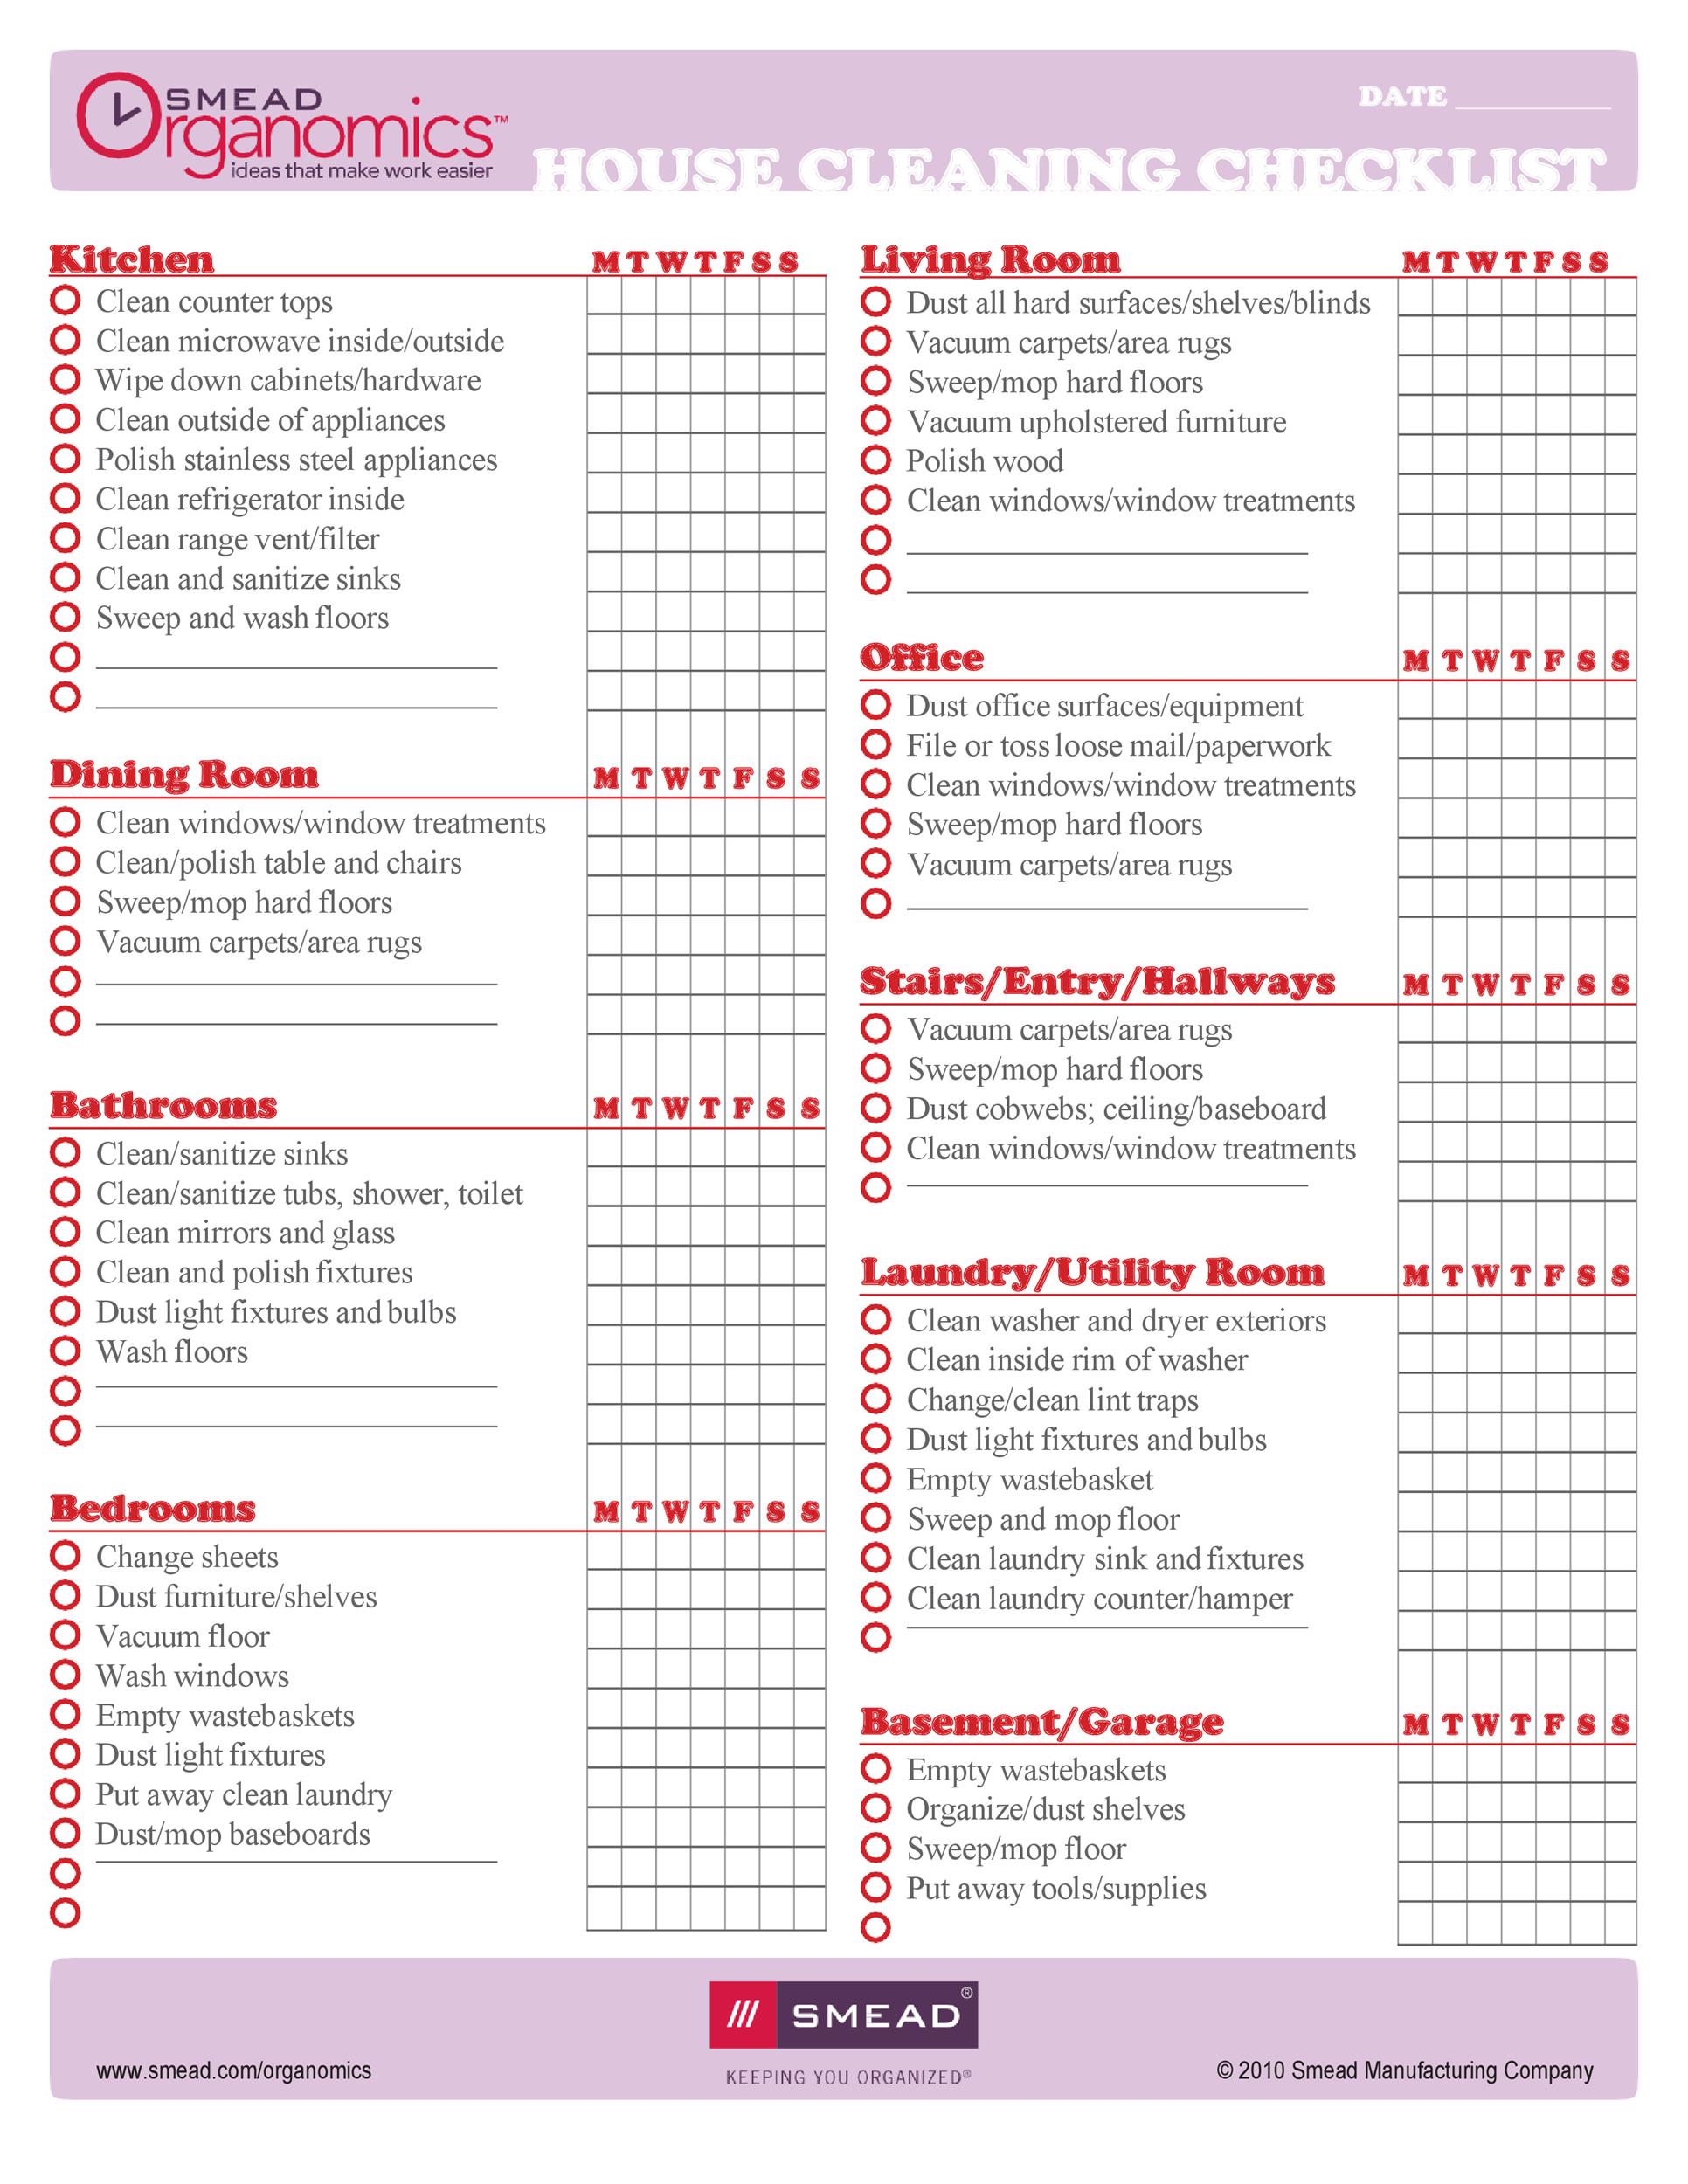 House cleaning schedule template icard. Ibaldo. Co.